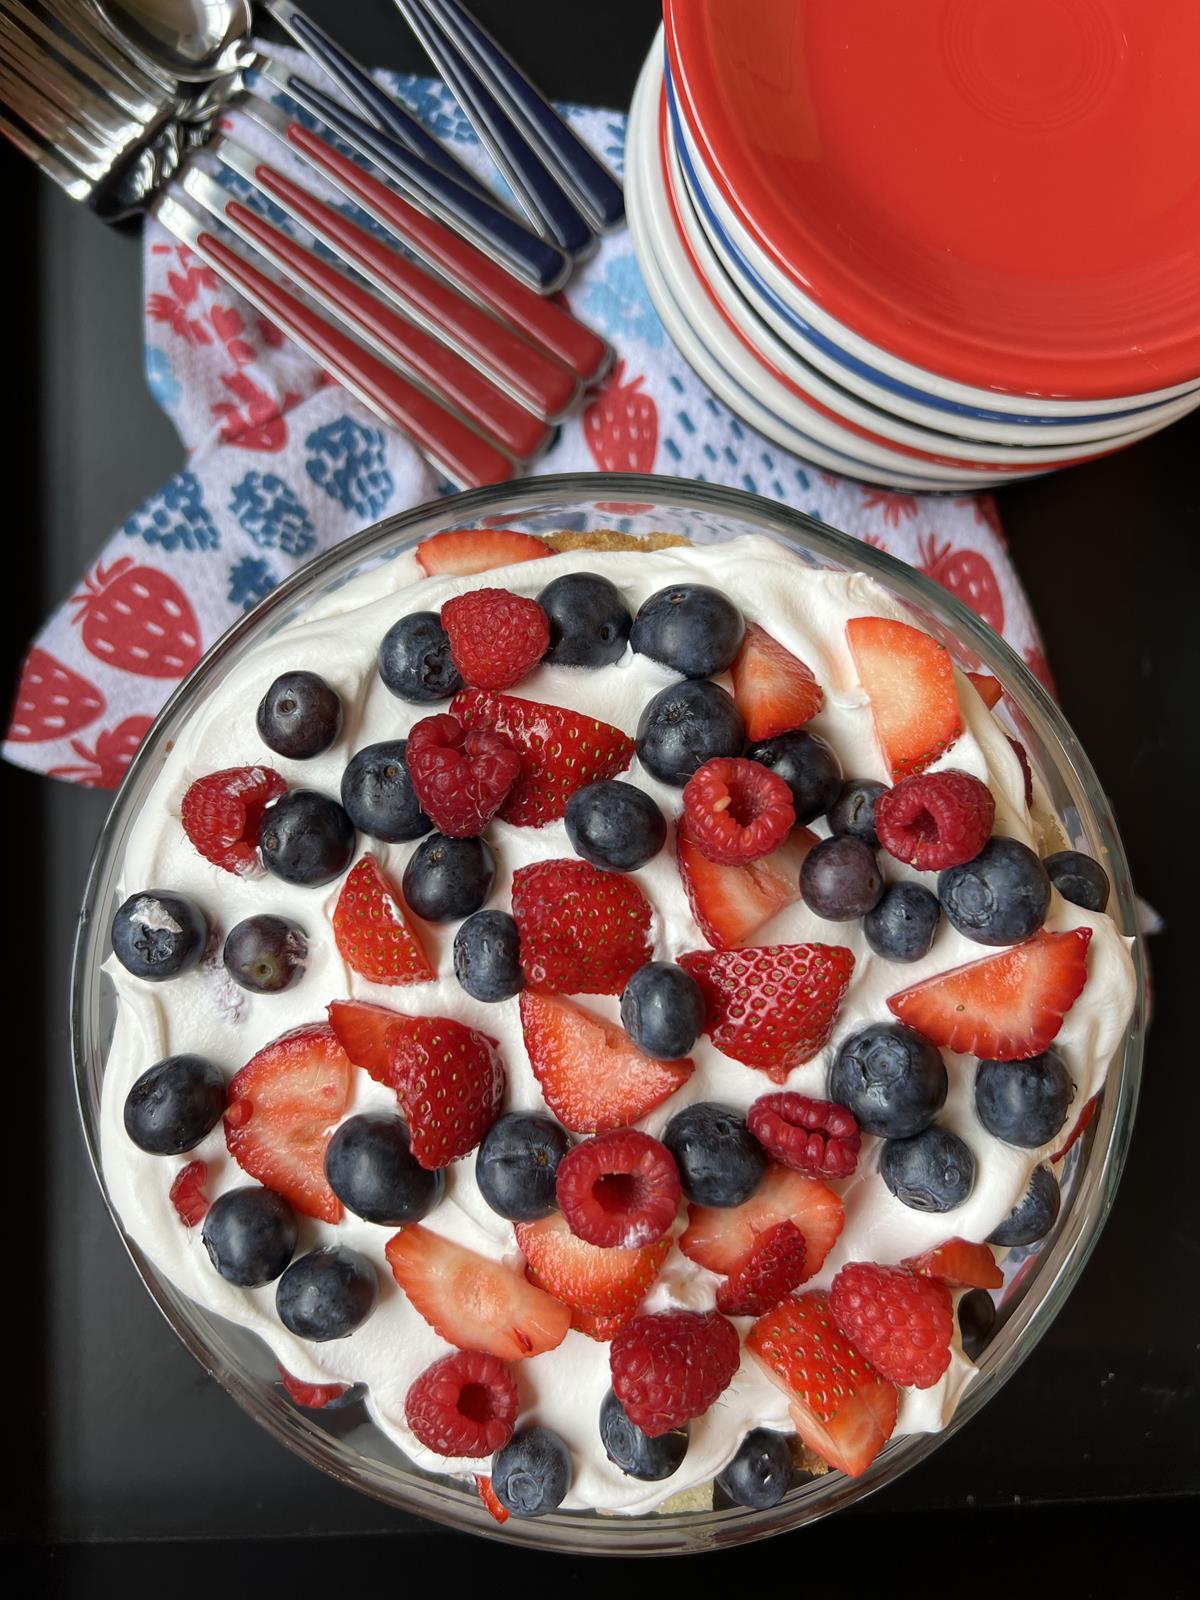 berries and pound cake in glass bowl with red white and blue plates